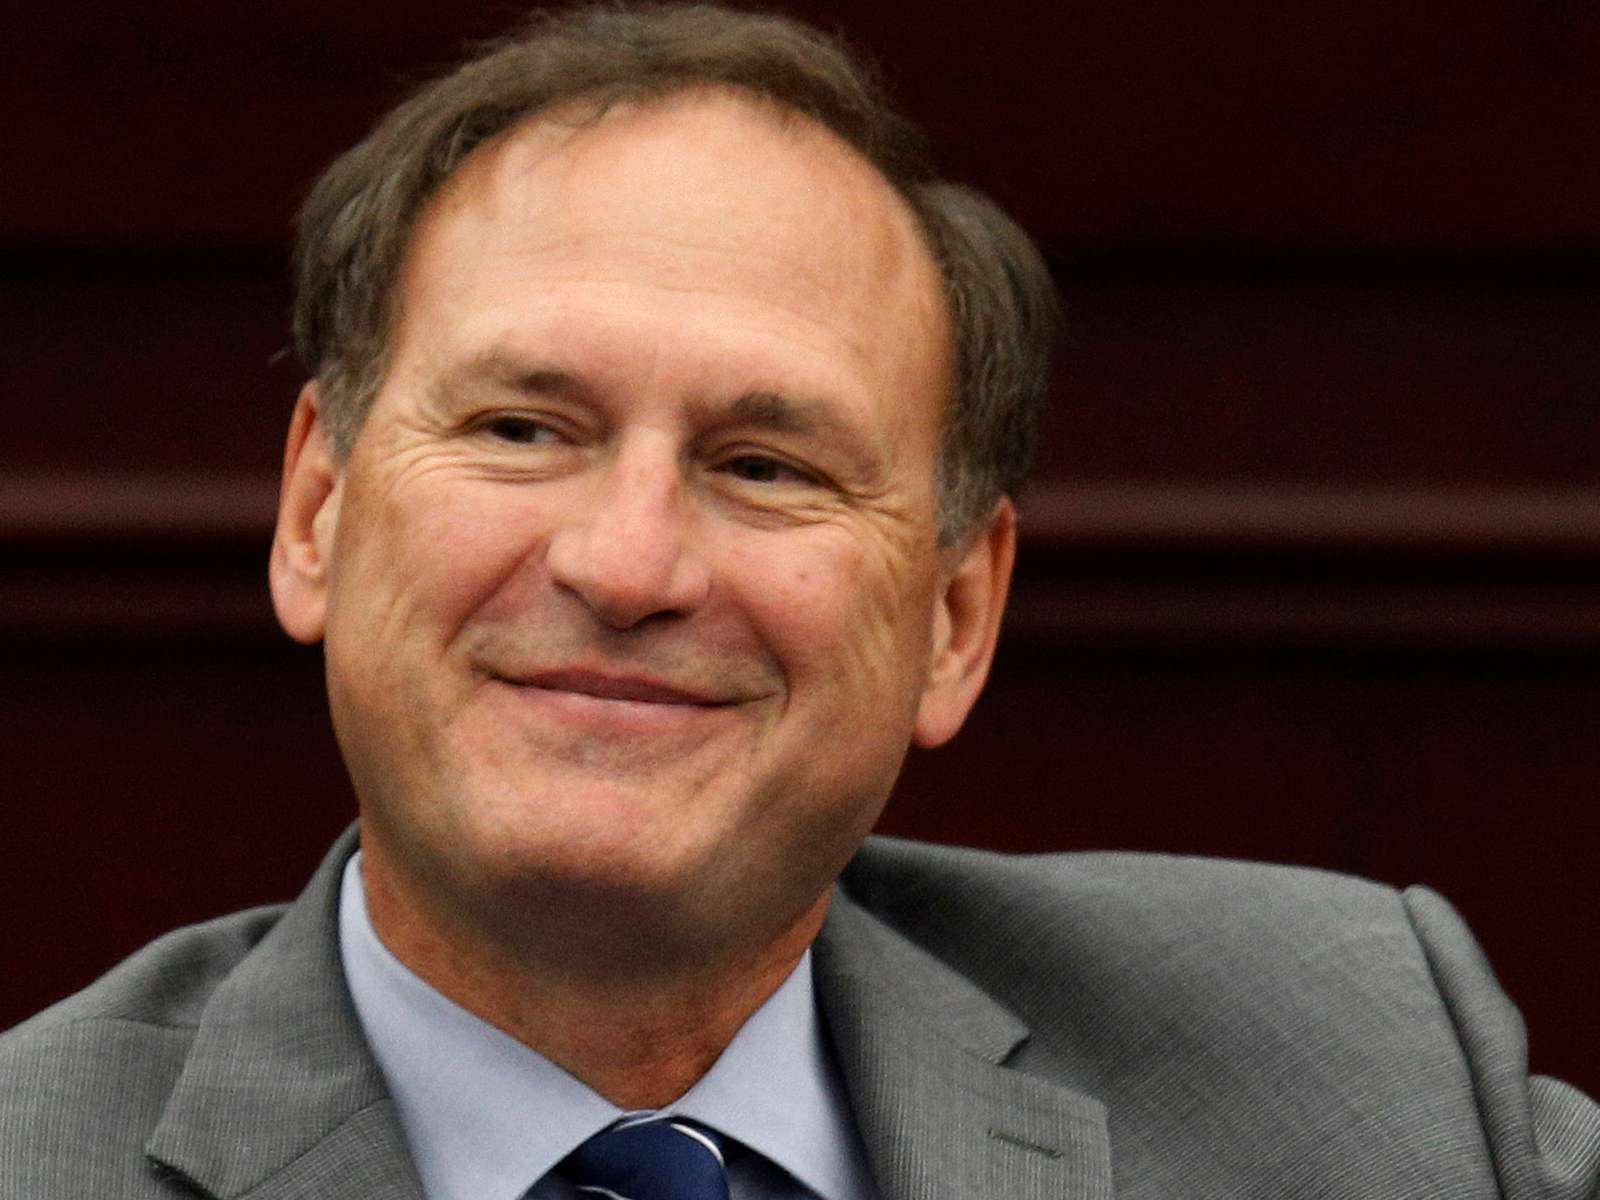 Justice Samuel Alito, whose opinion on Roe v. Wade leaked to the press on Monday. Photo: JoshEllie1234